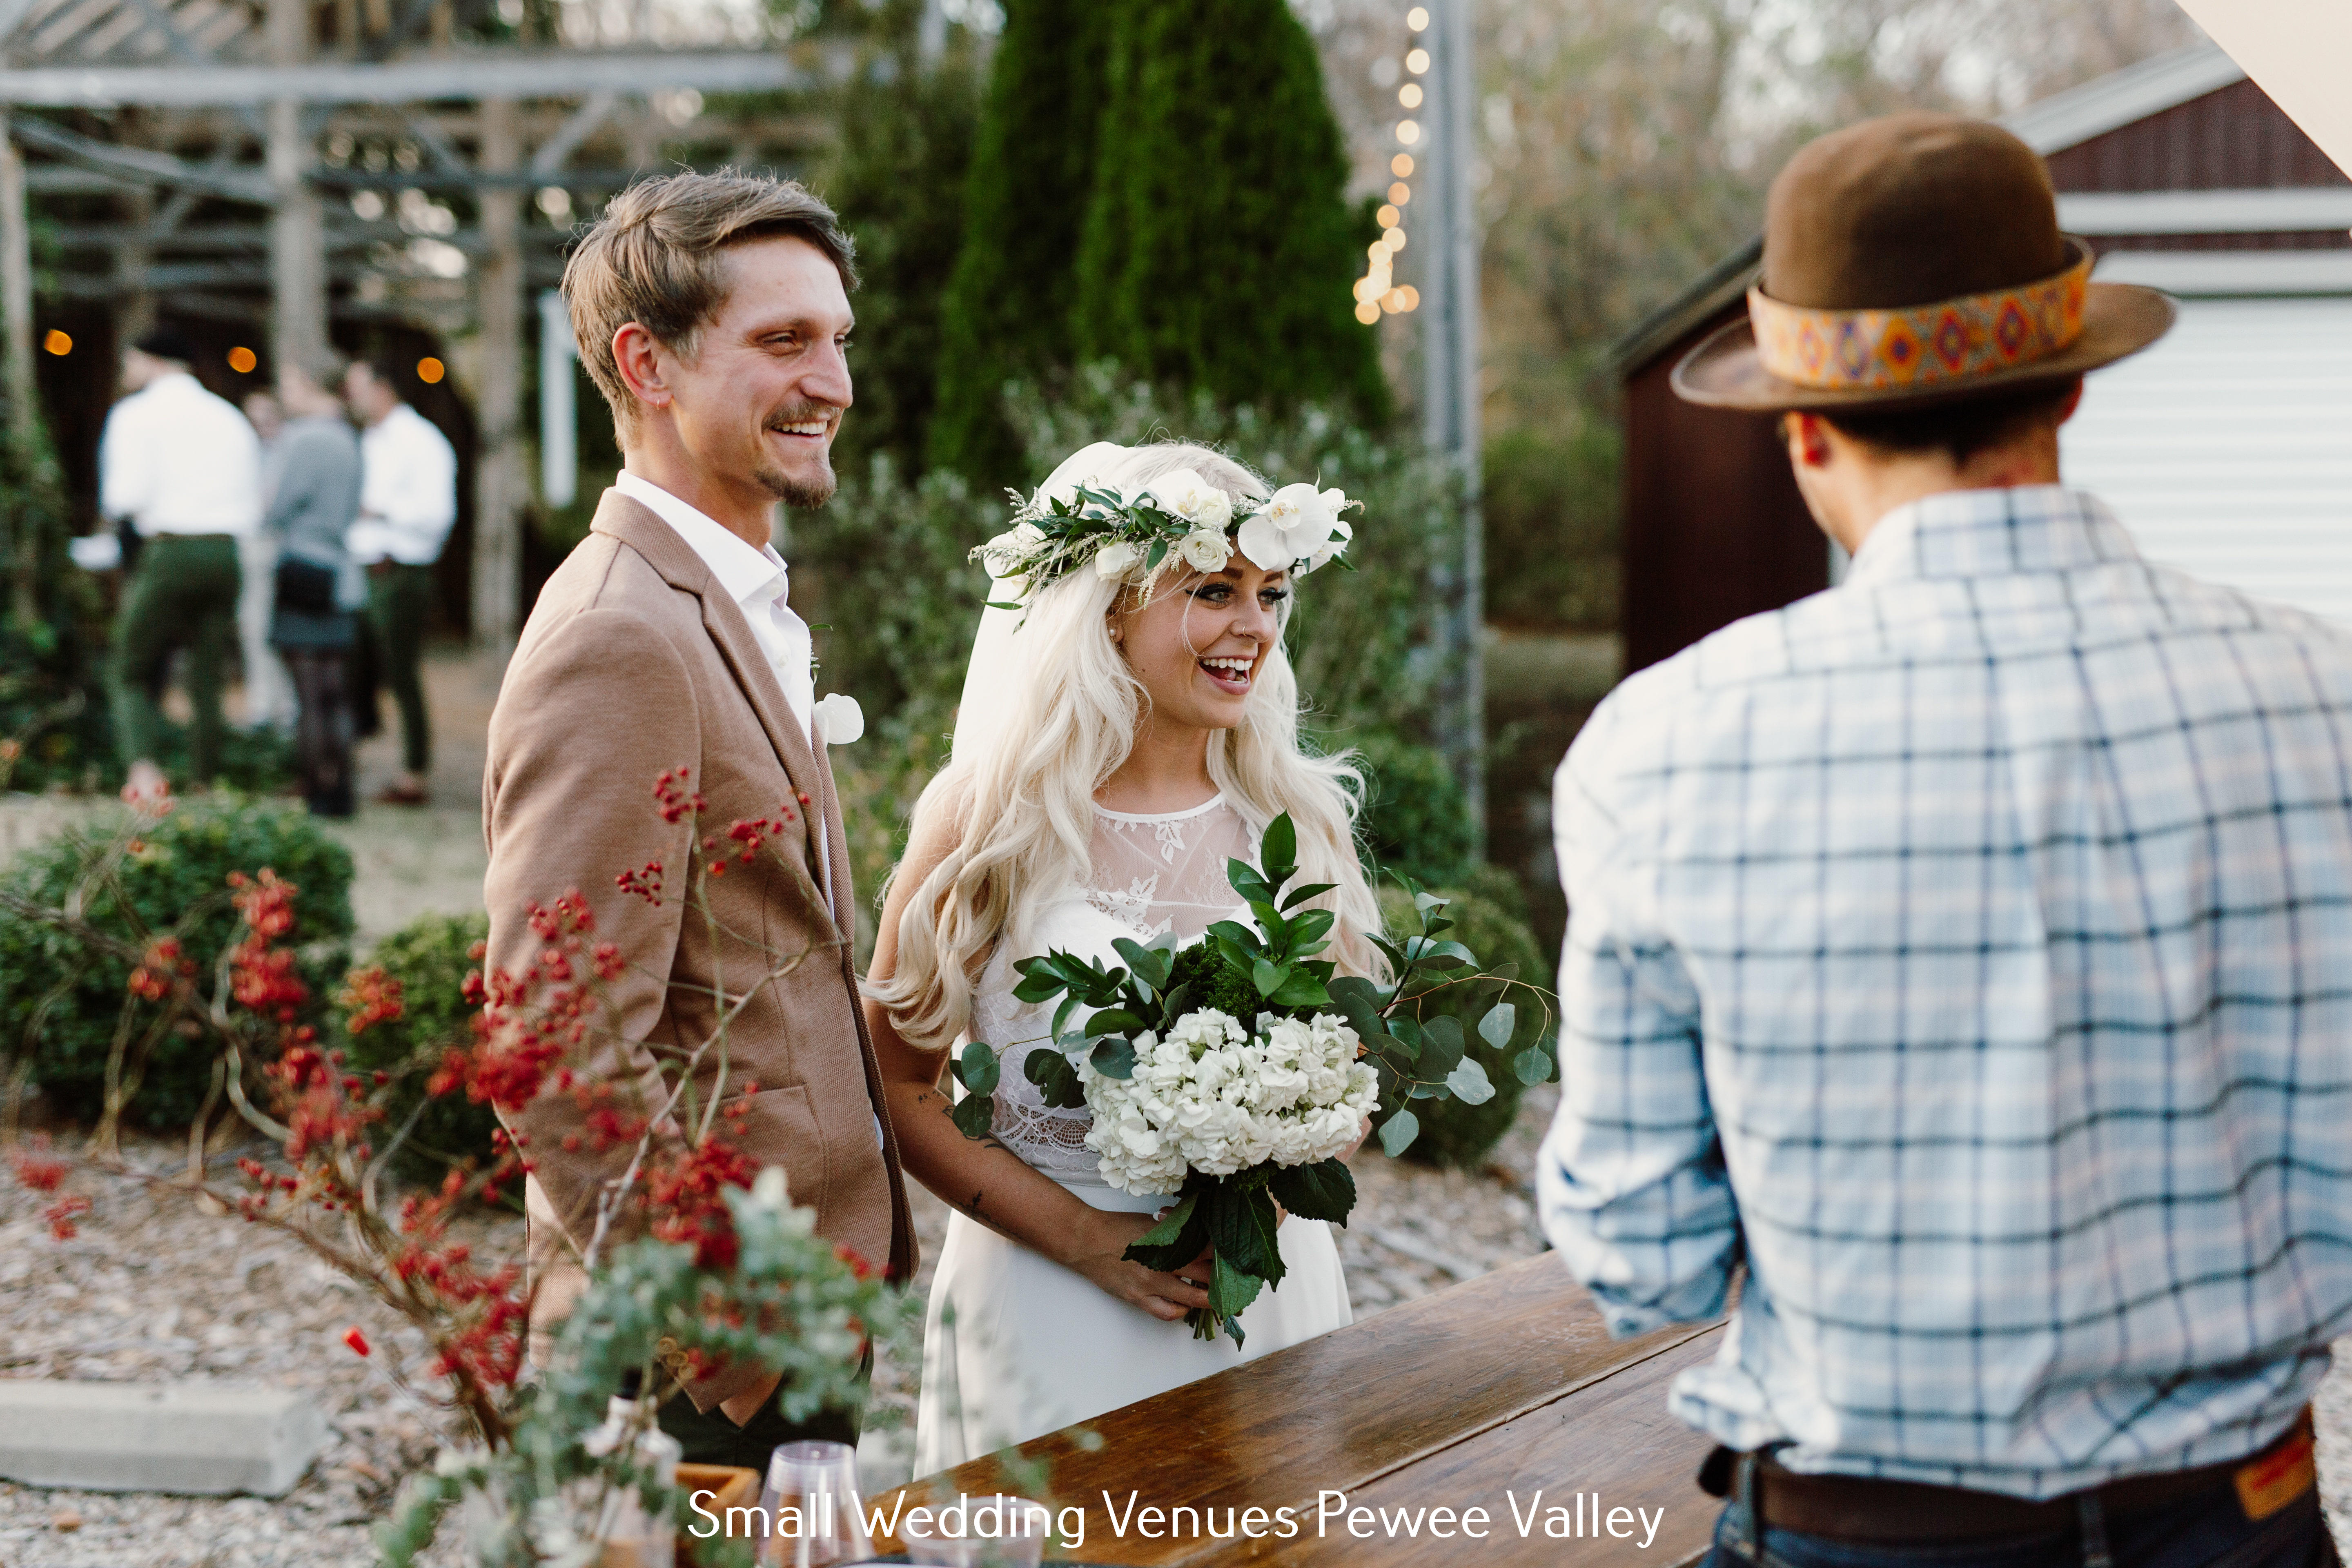 314 Exchange Shares Tips on Choosing the Perfect Wedding Venue